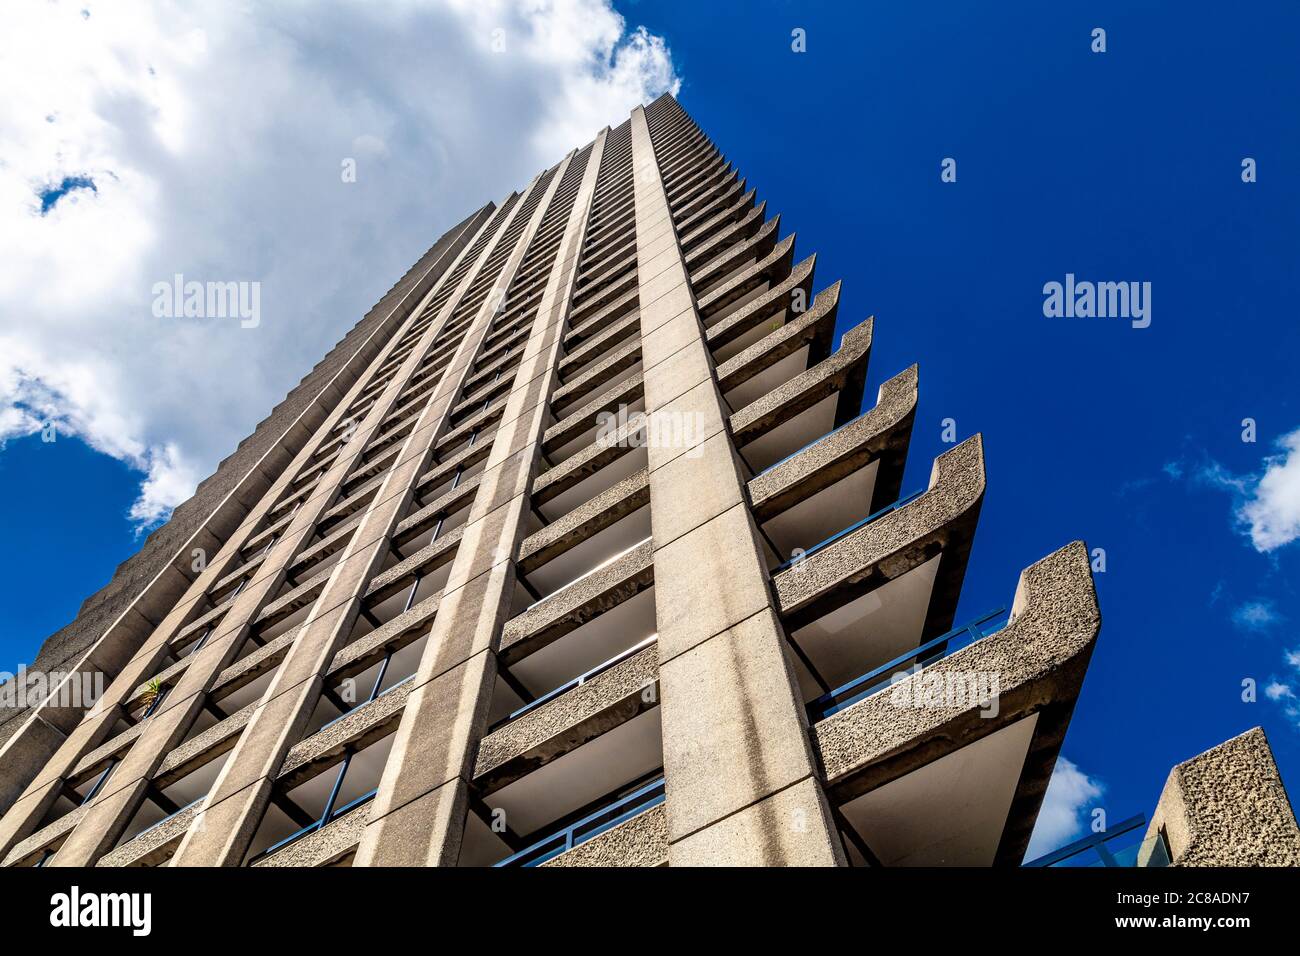 Shakespeare Tower at the brutalist Barbican Estate, London, UK Stock Photo